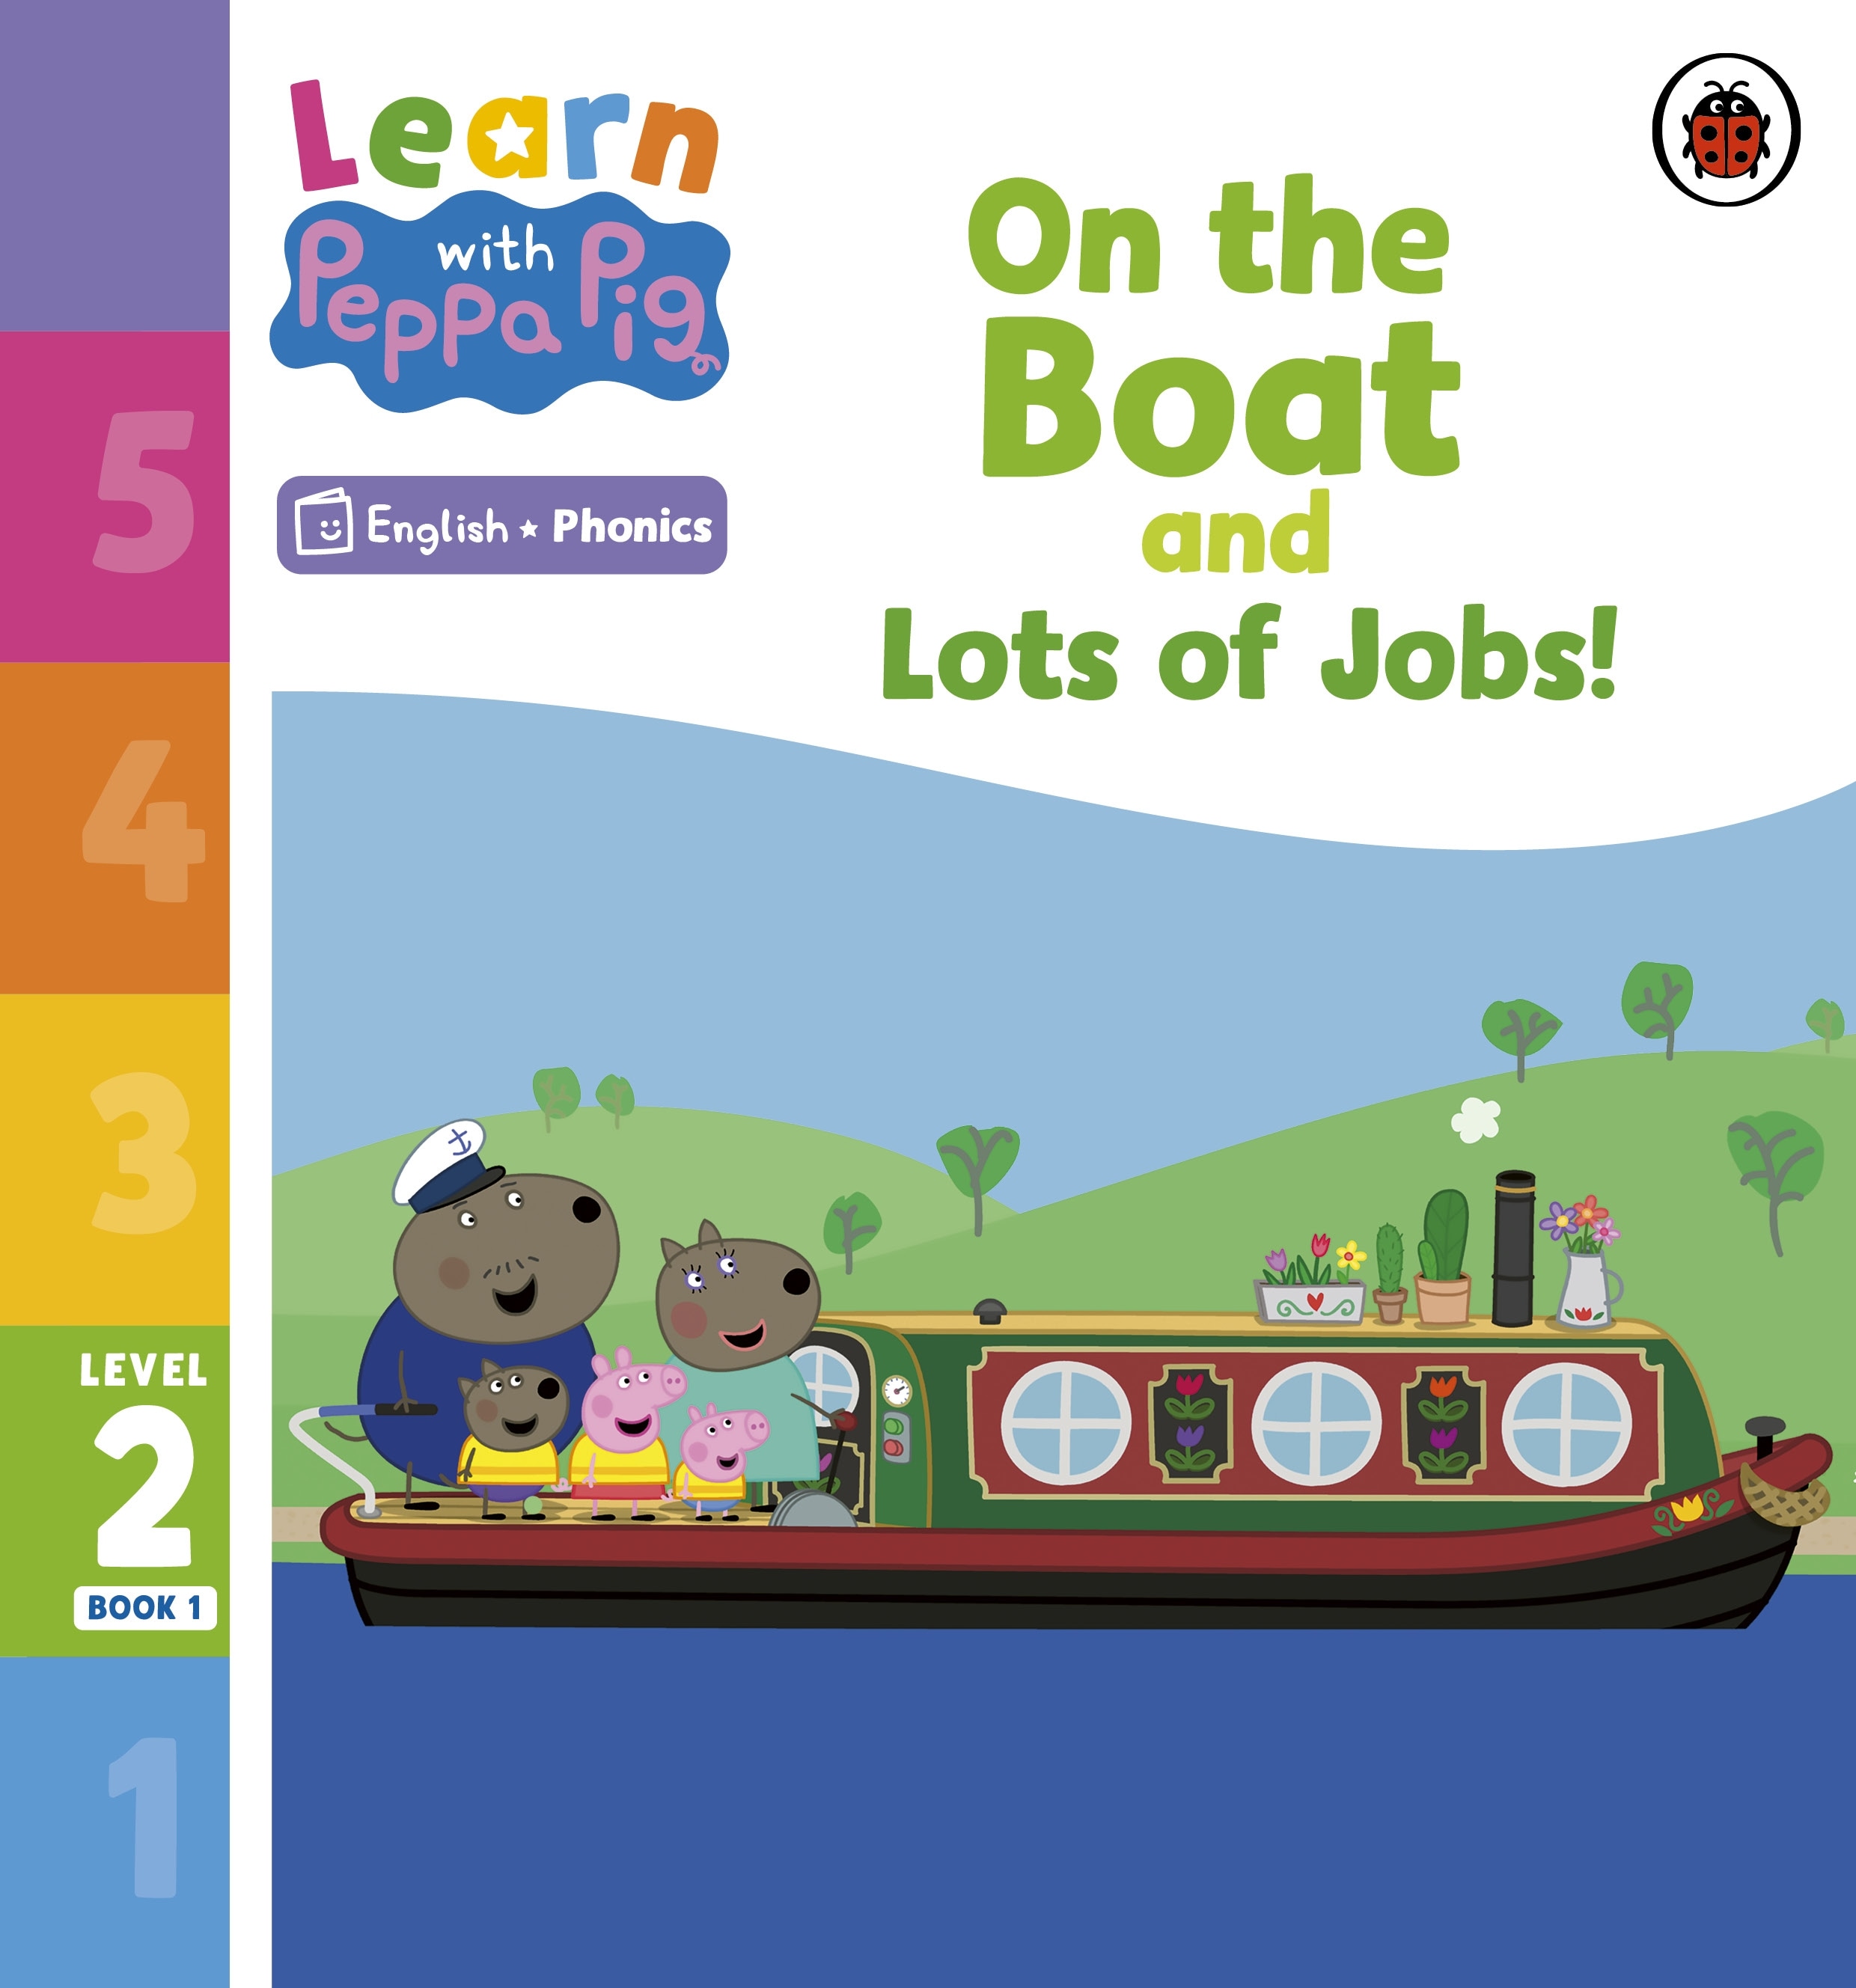 Learn with Peppa Phonics Level 2 Book 1 — On the Boat and Lots of Jobs! (Phonics Reader)